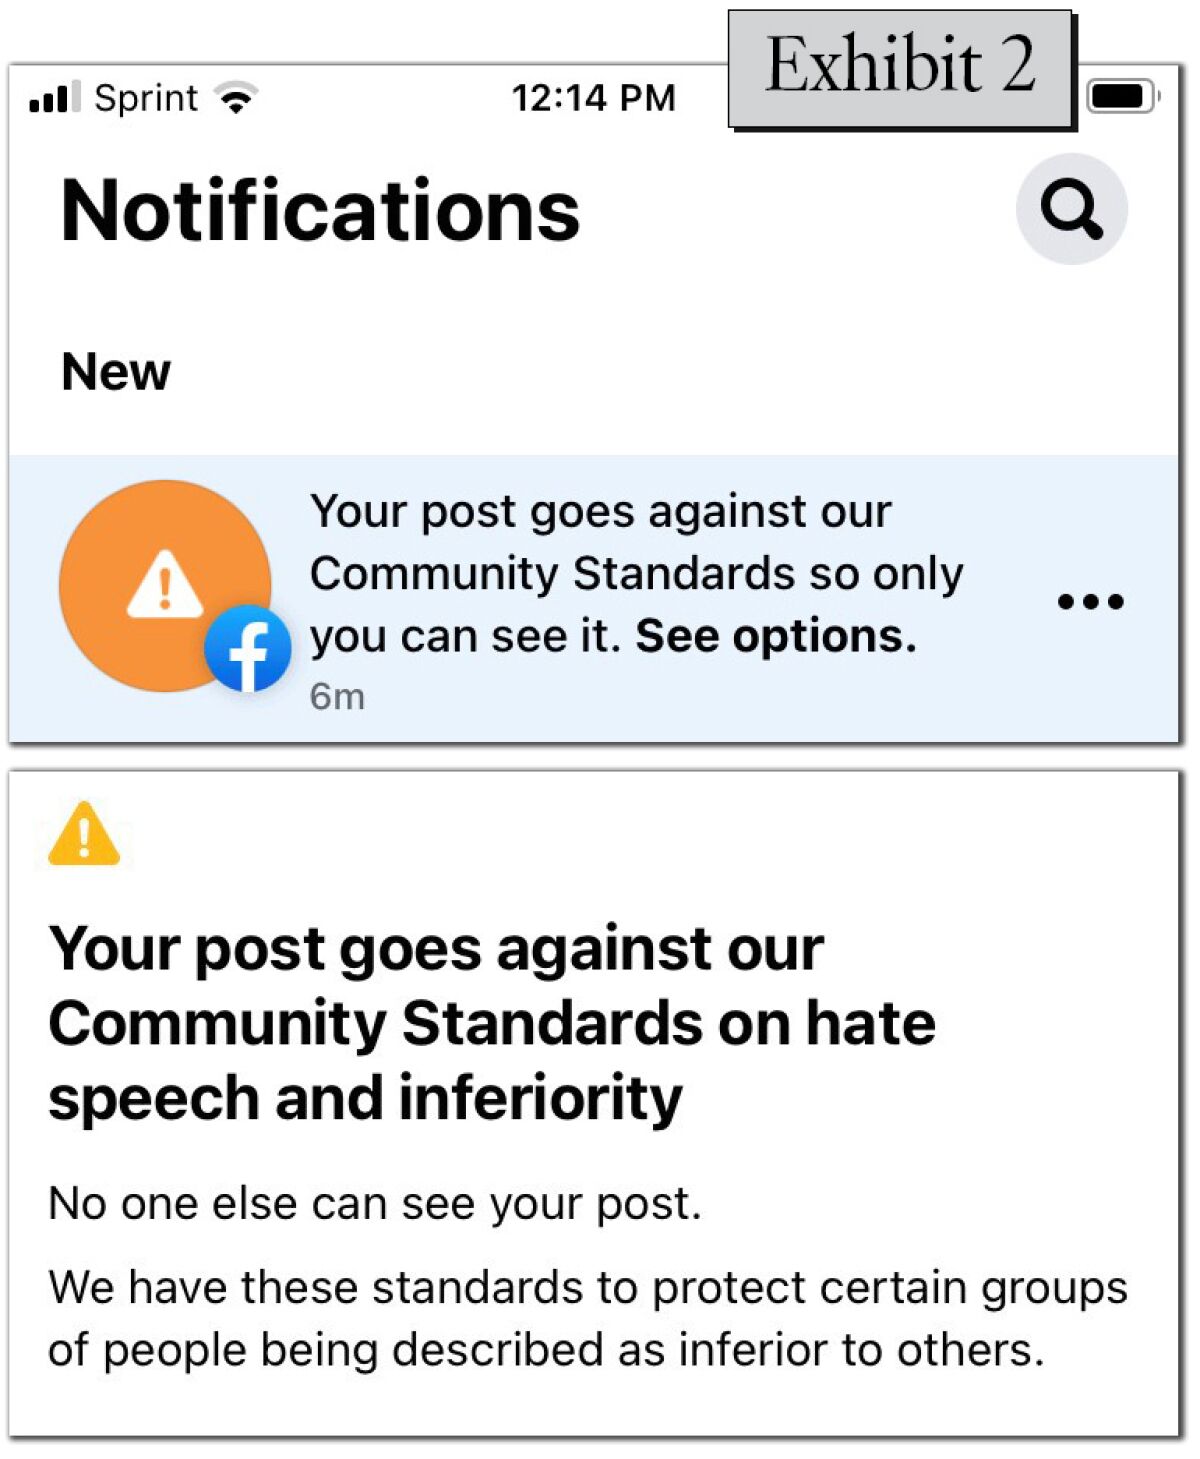 A notification says "Your post goes against our Community Standards on hate and inferiority."